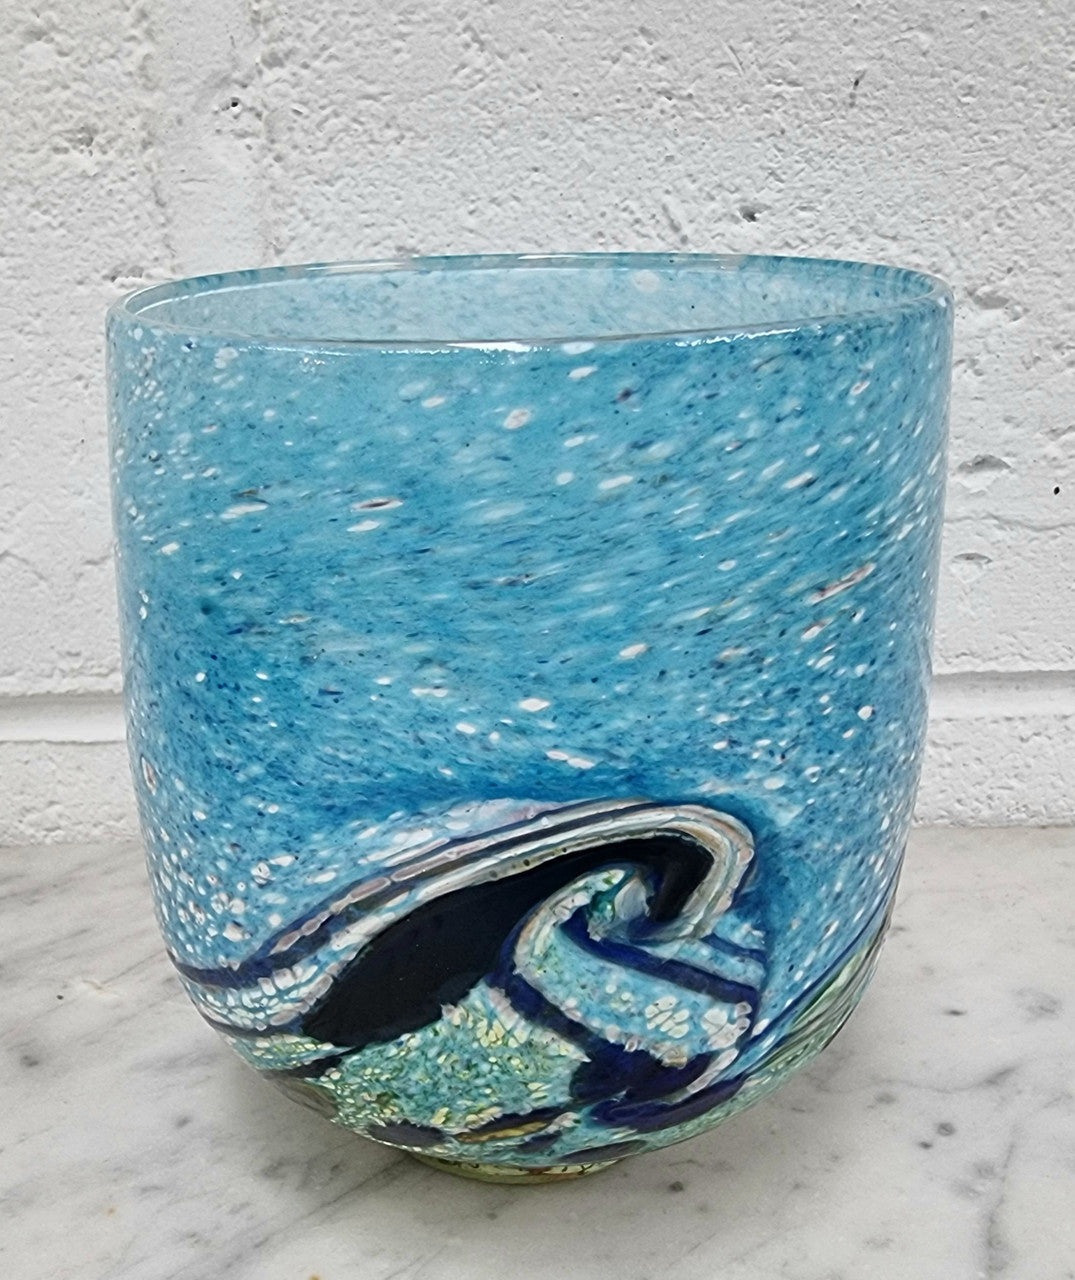 Colorful art glass vase signed by Peter Reynolds. In good original condition with no chips or cracks.